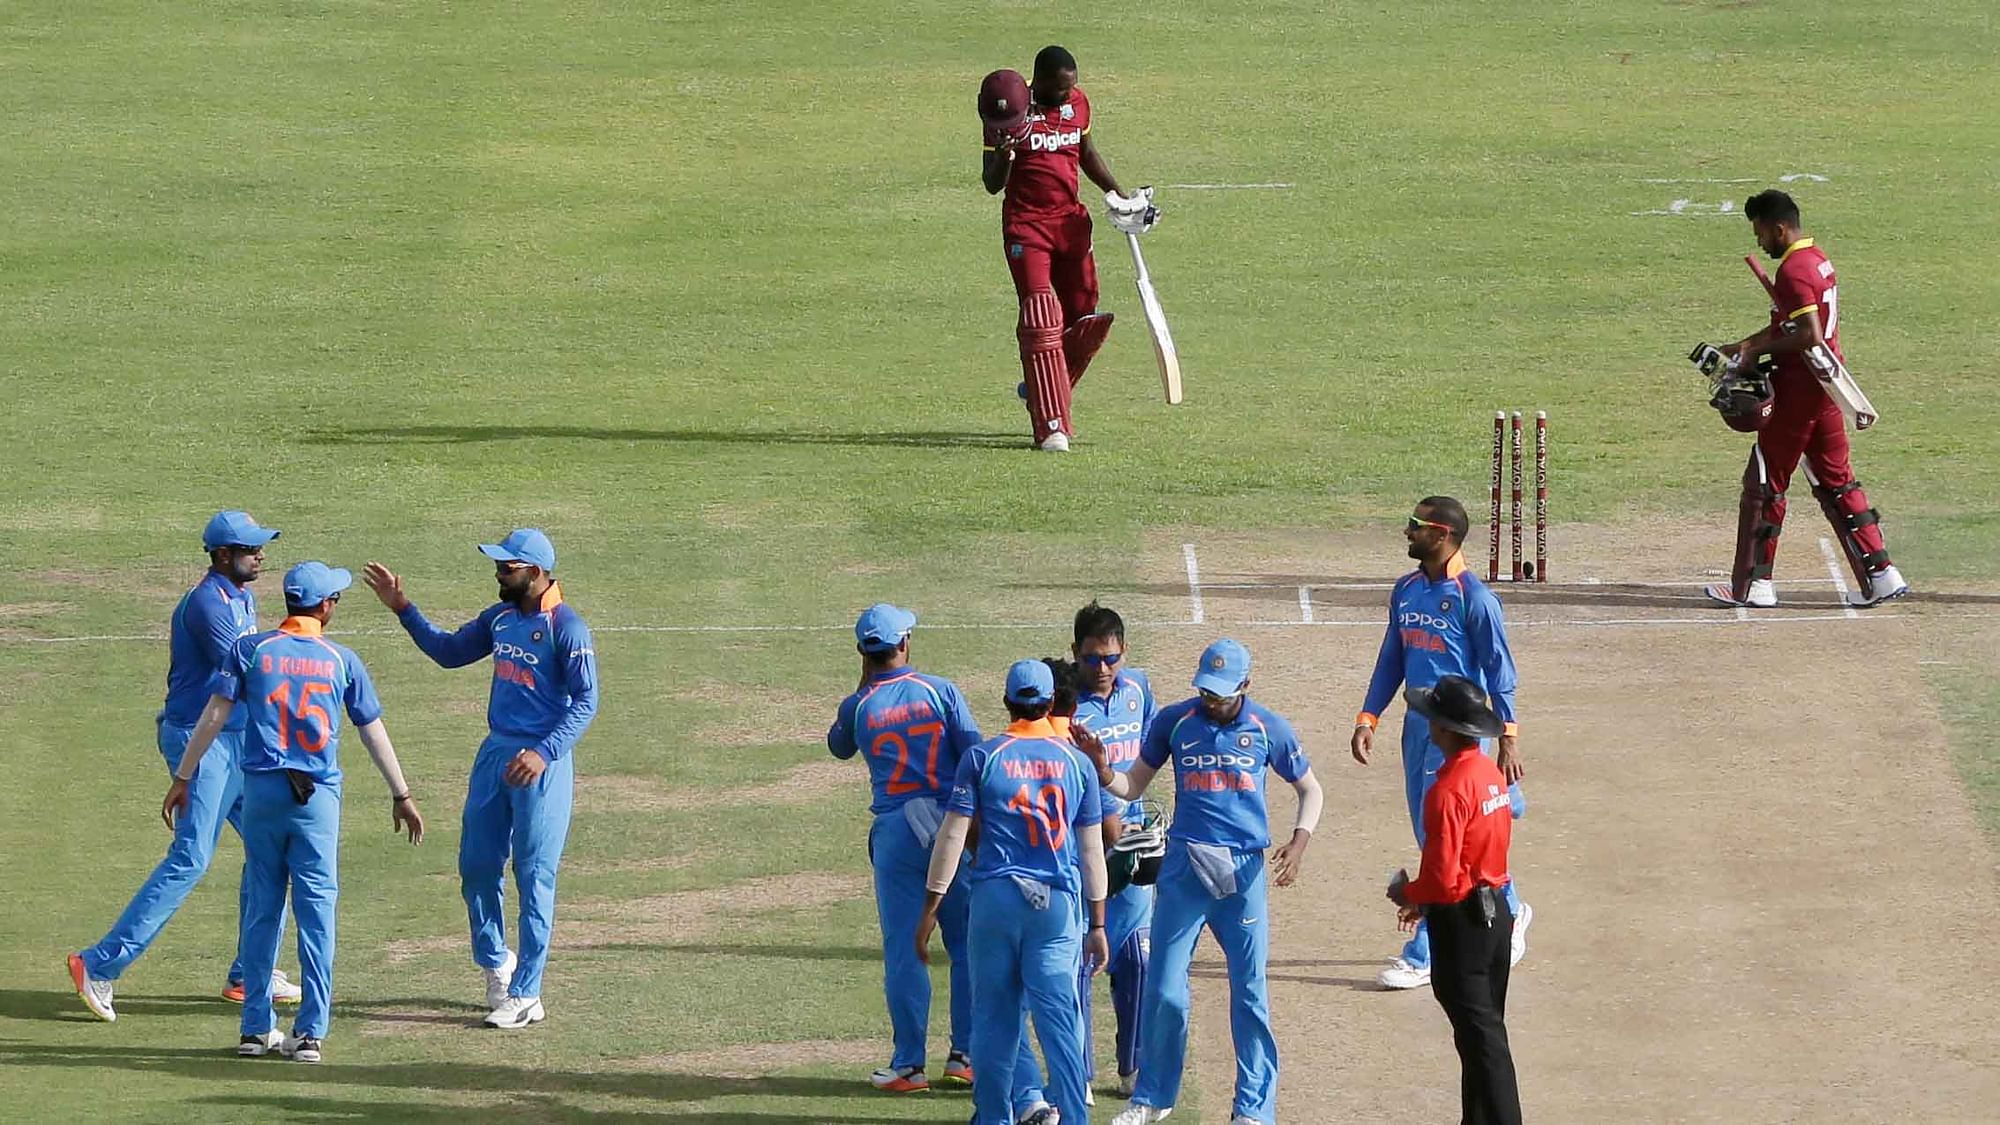 West Indies chooses to bat after winning the toss against India